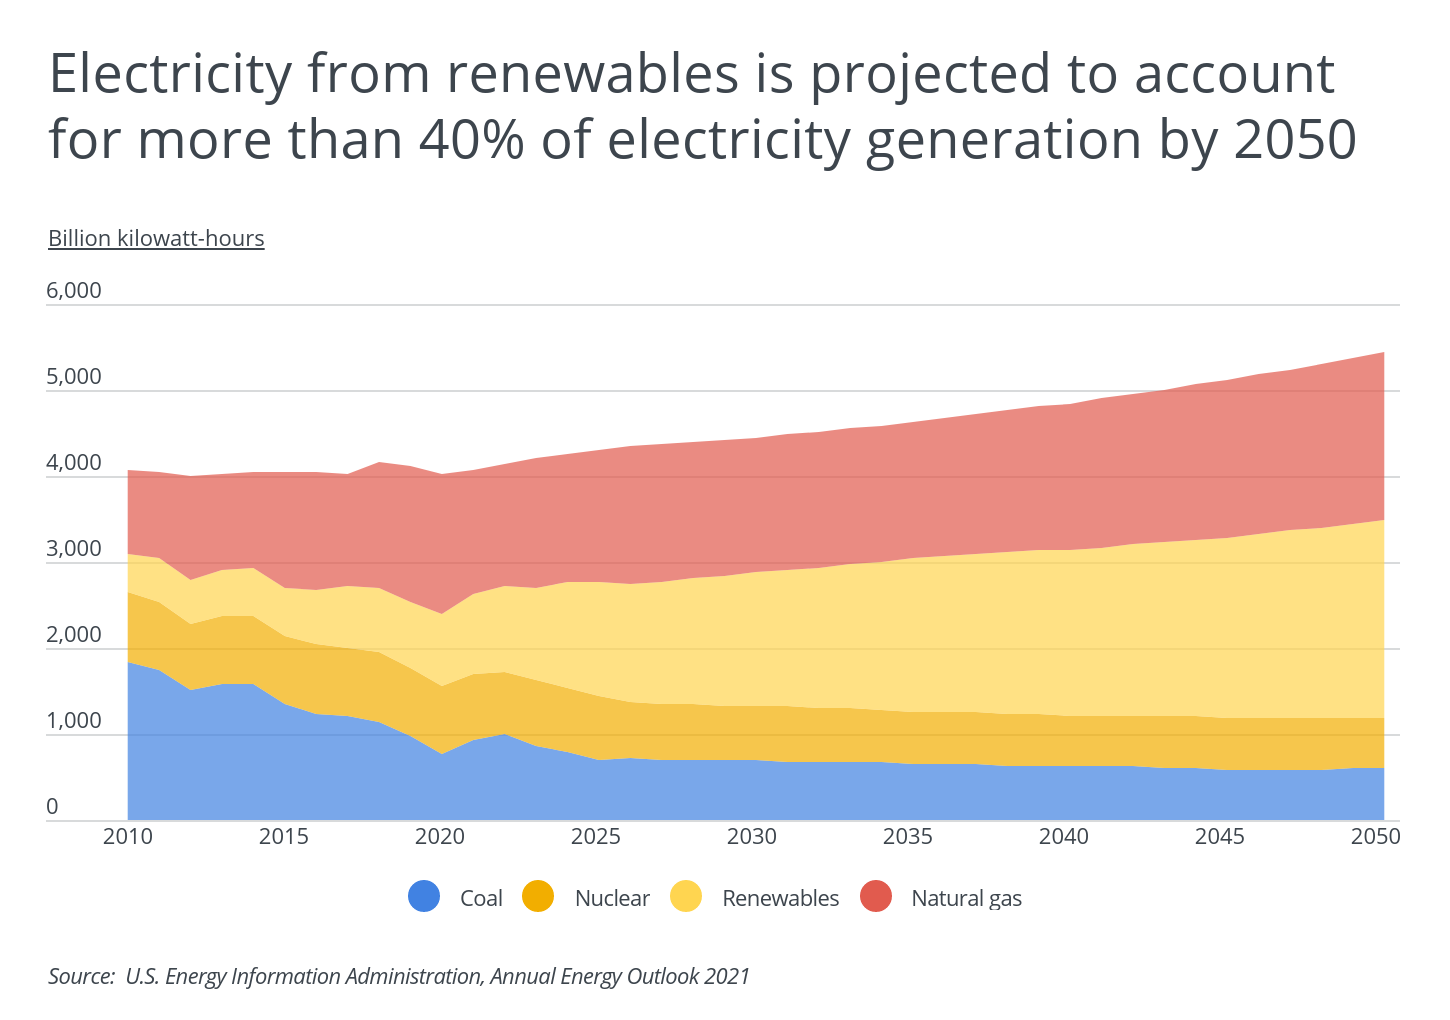 Electricity from renewables is projected to account for more than 40% of electricity generation by 2050